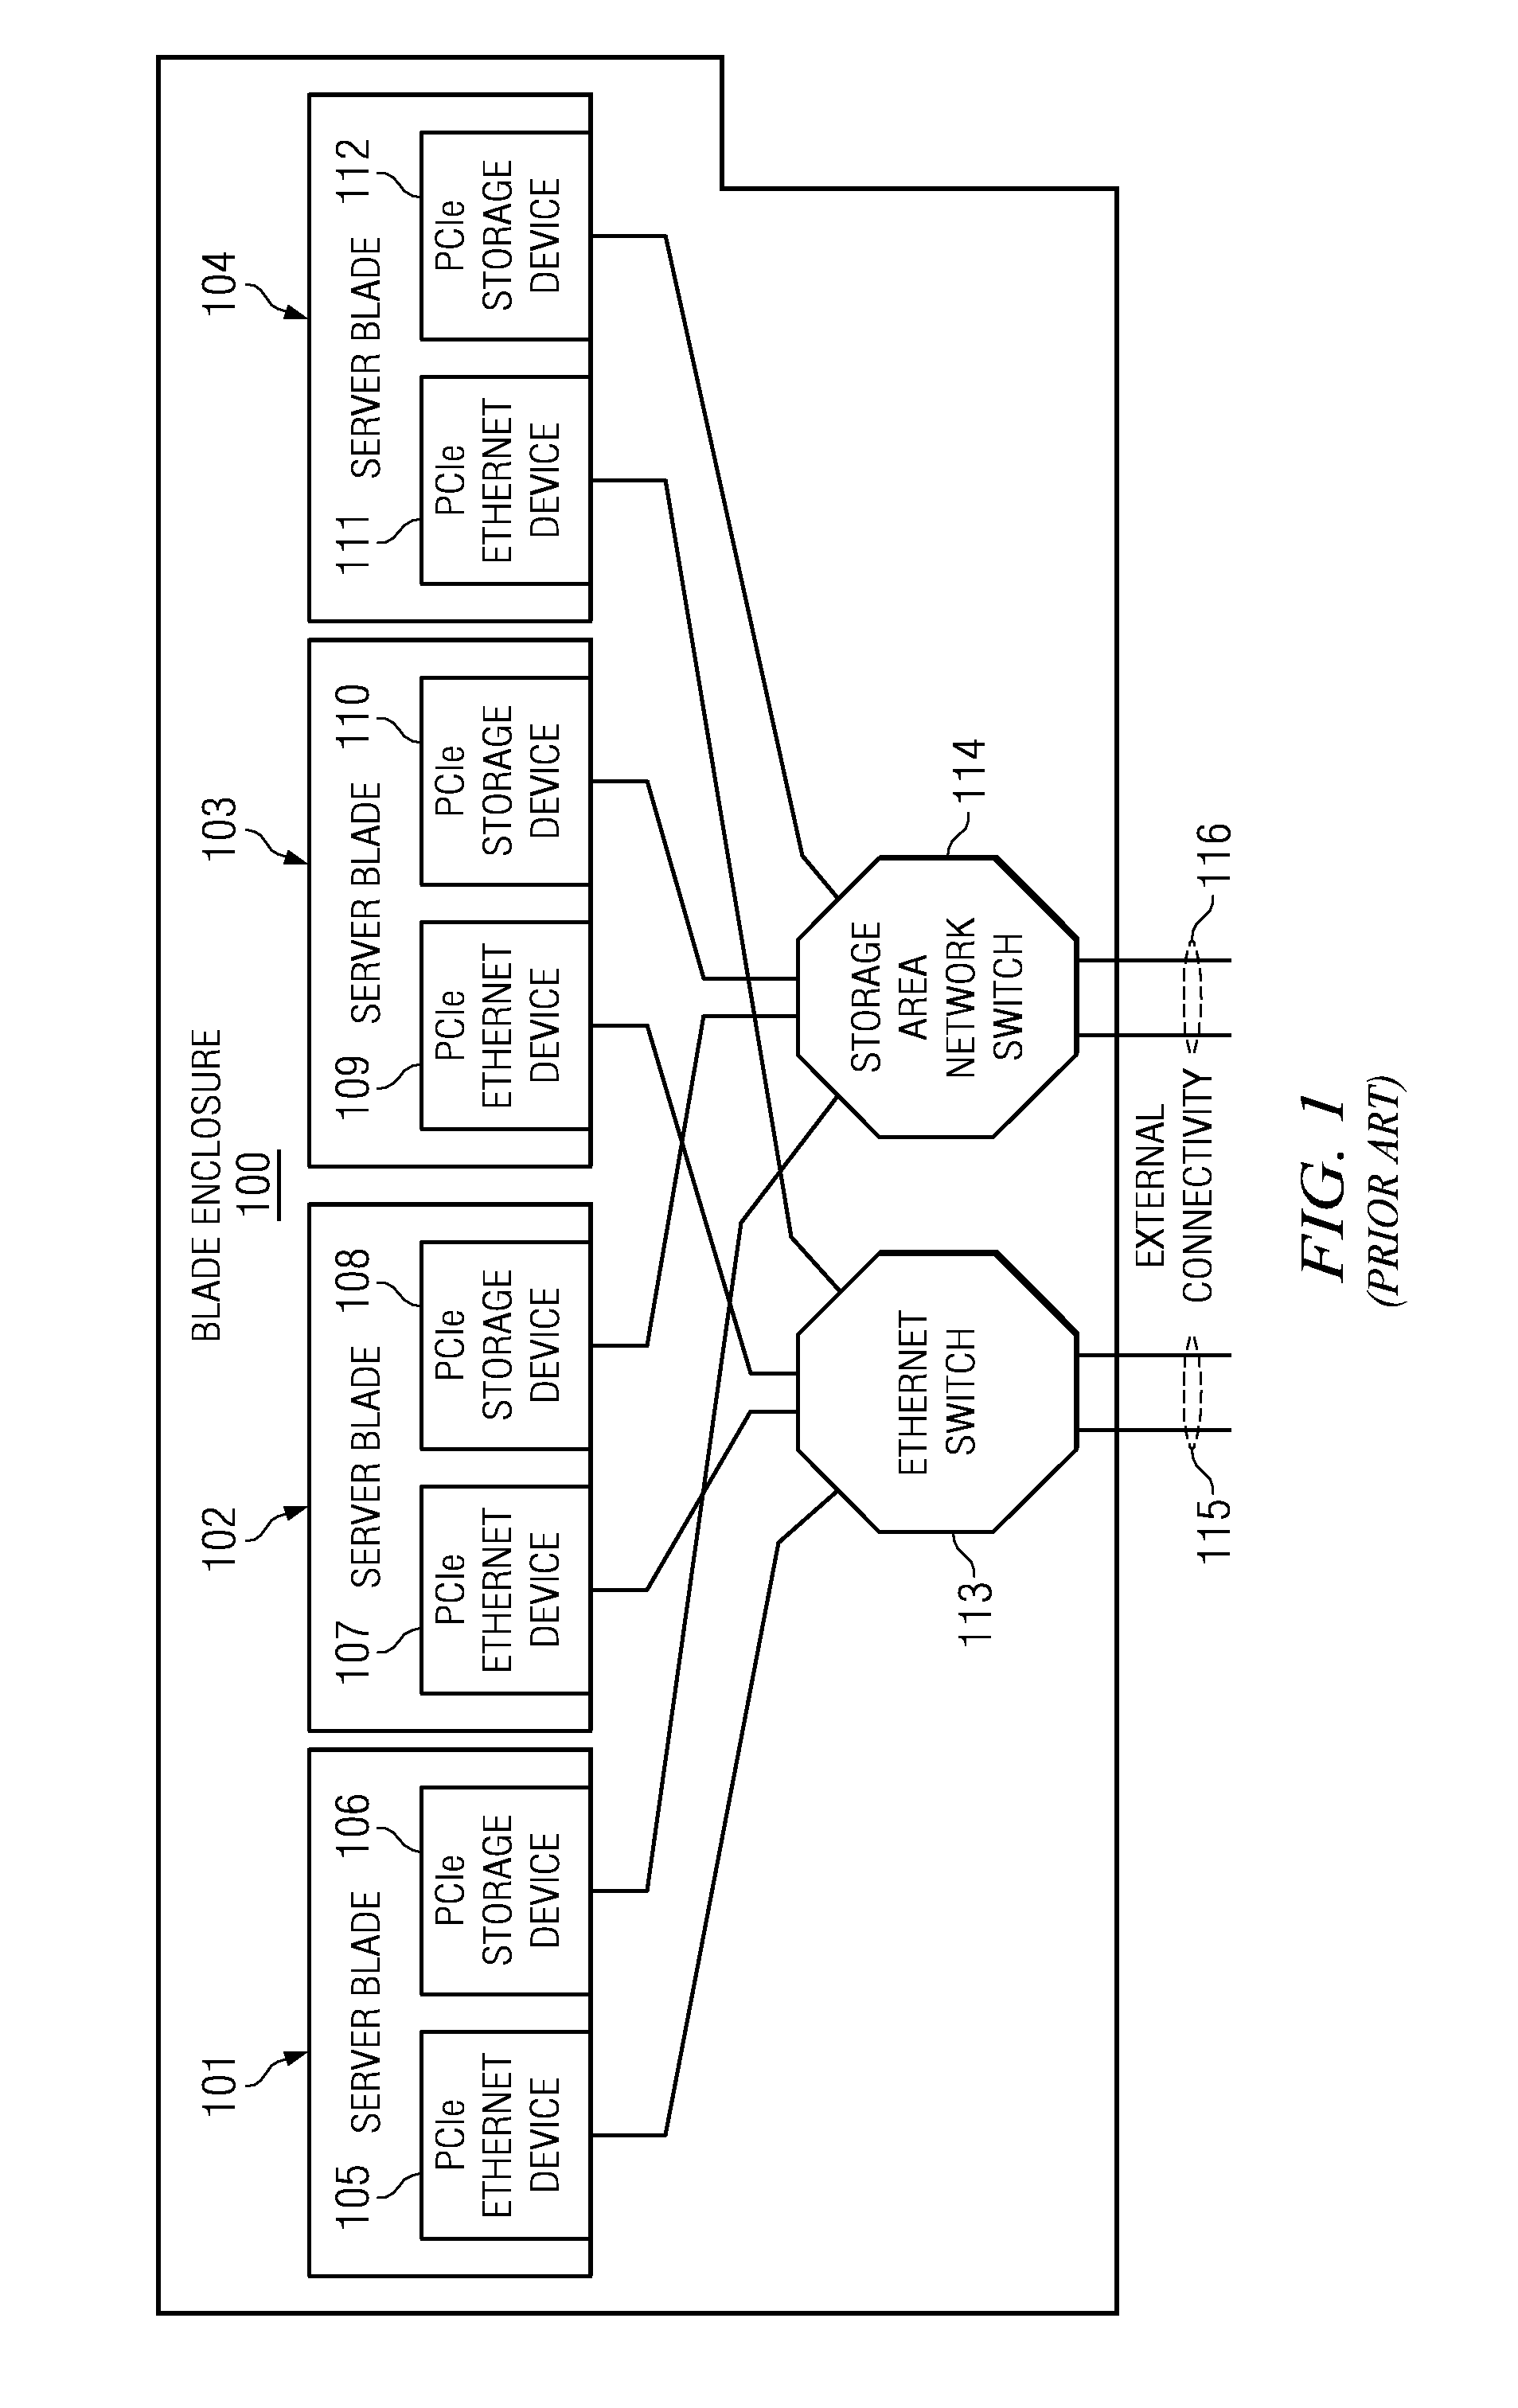 Multi-root I/O virtualization using separate management facilities of multiple logical partitions